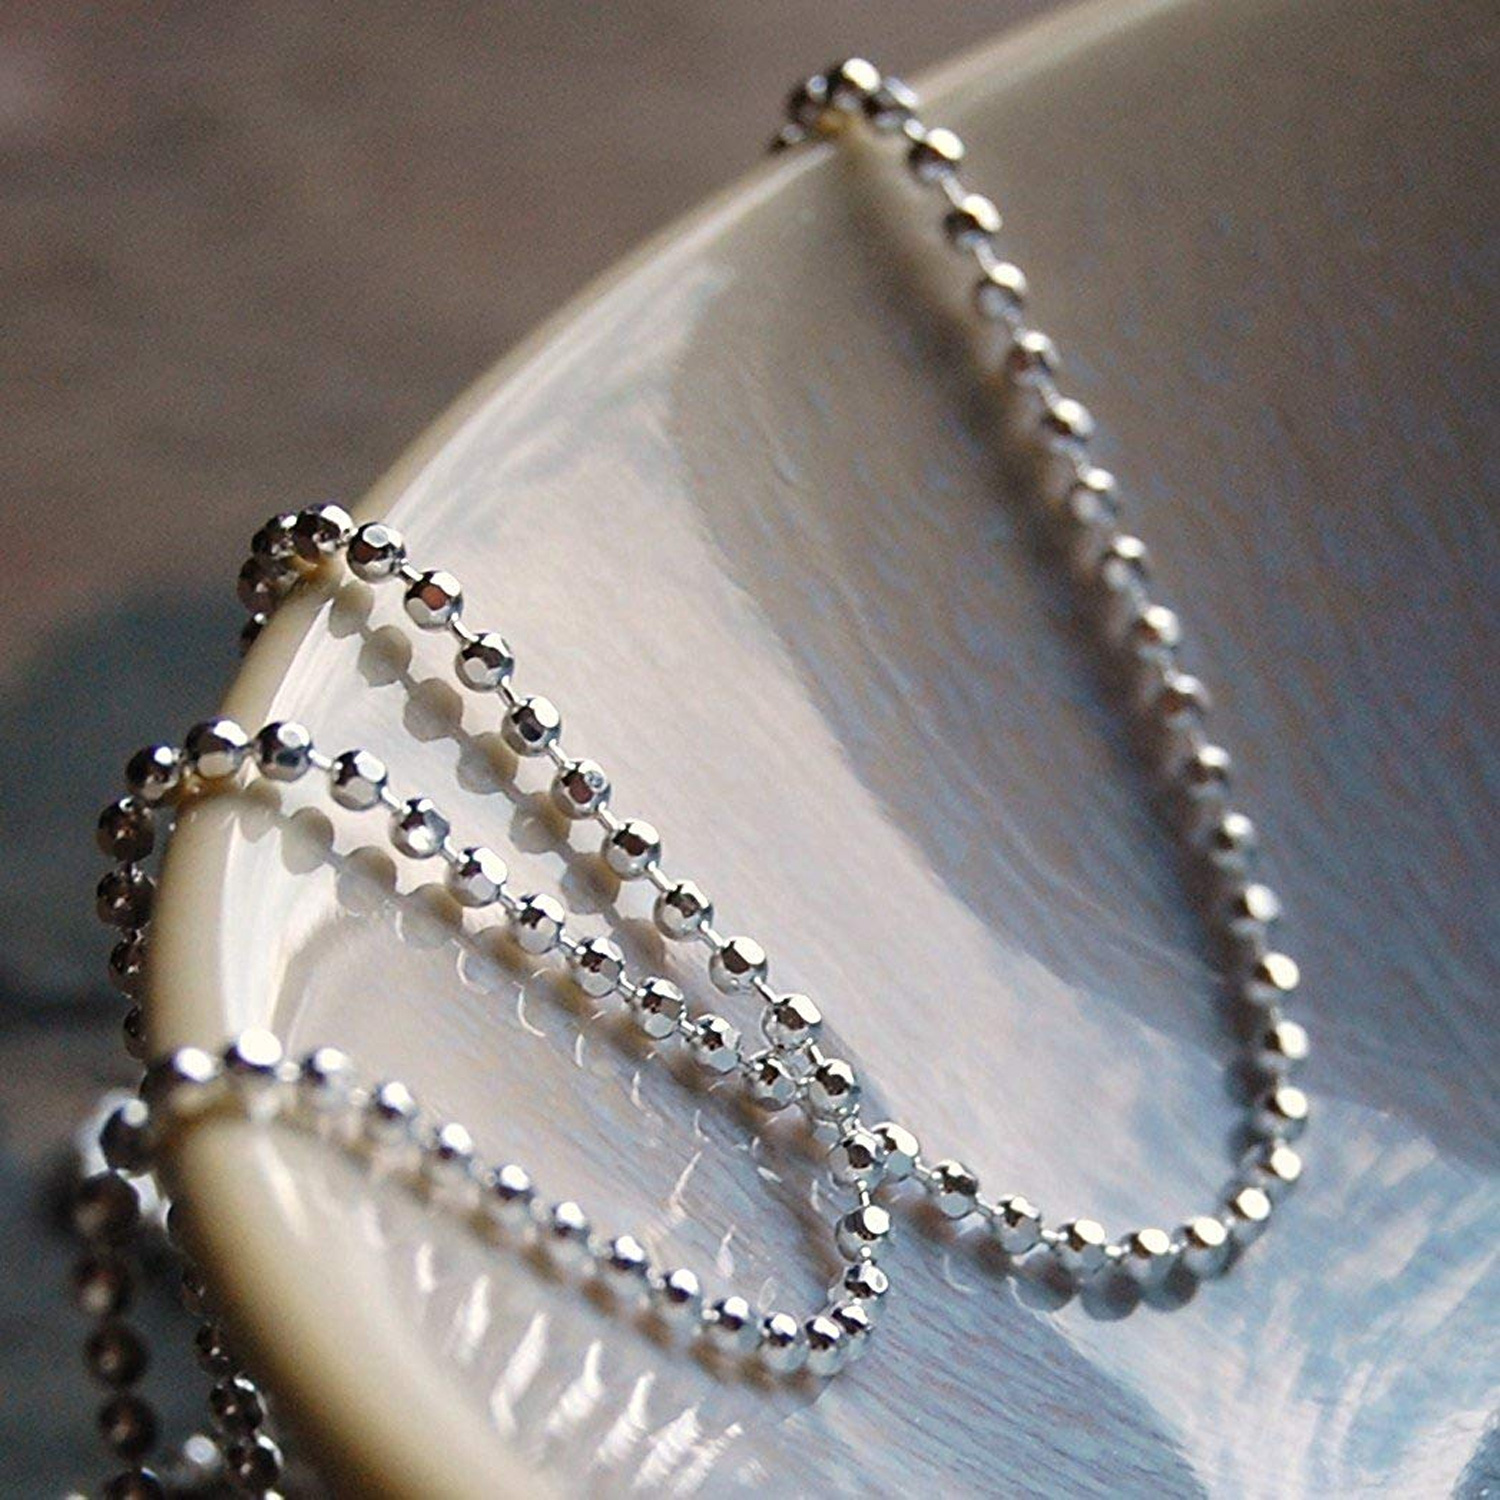 925 Sterling Silver 1.5MM Diamond Cut Bead Chain Necklace